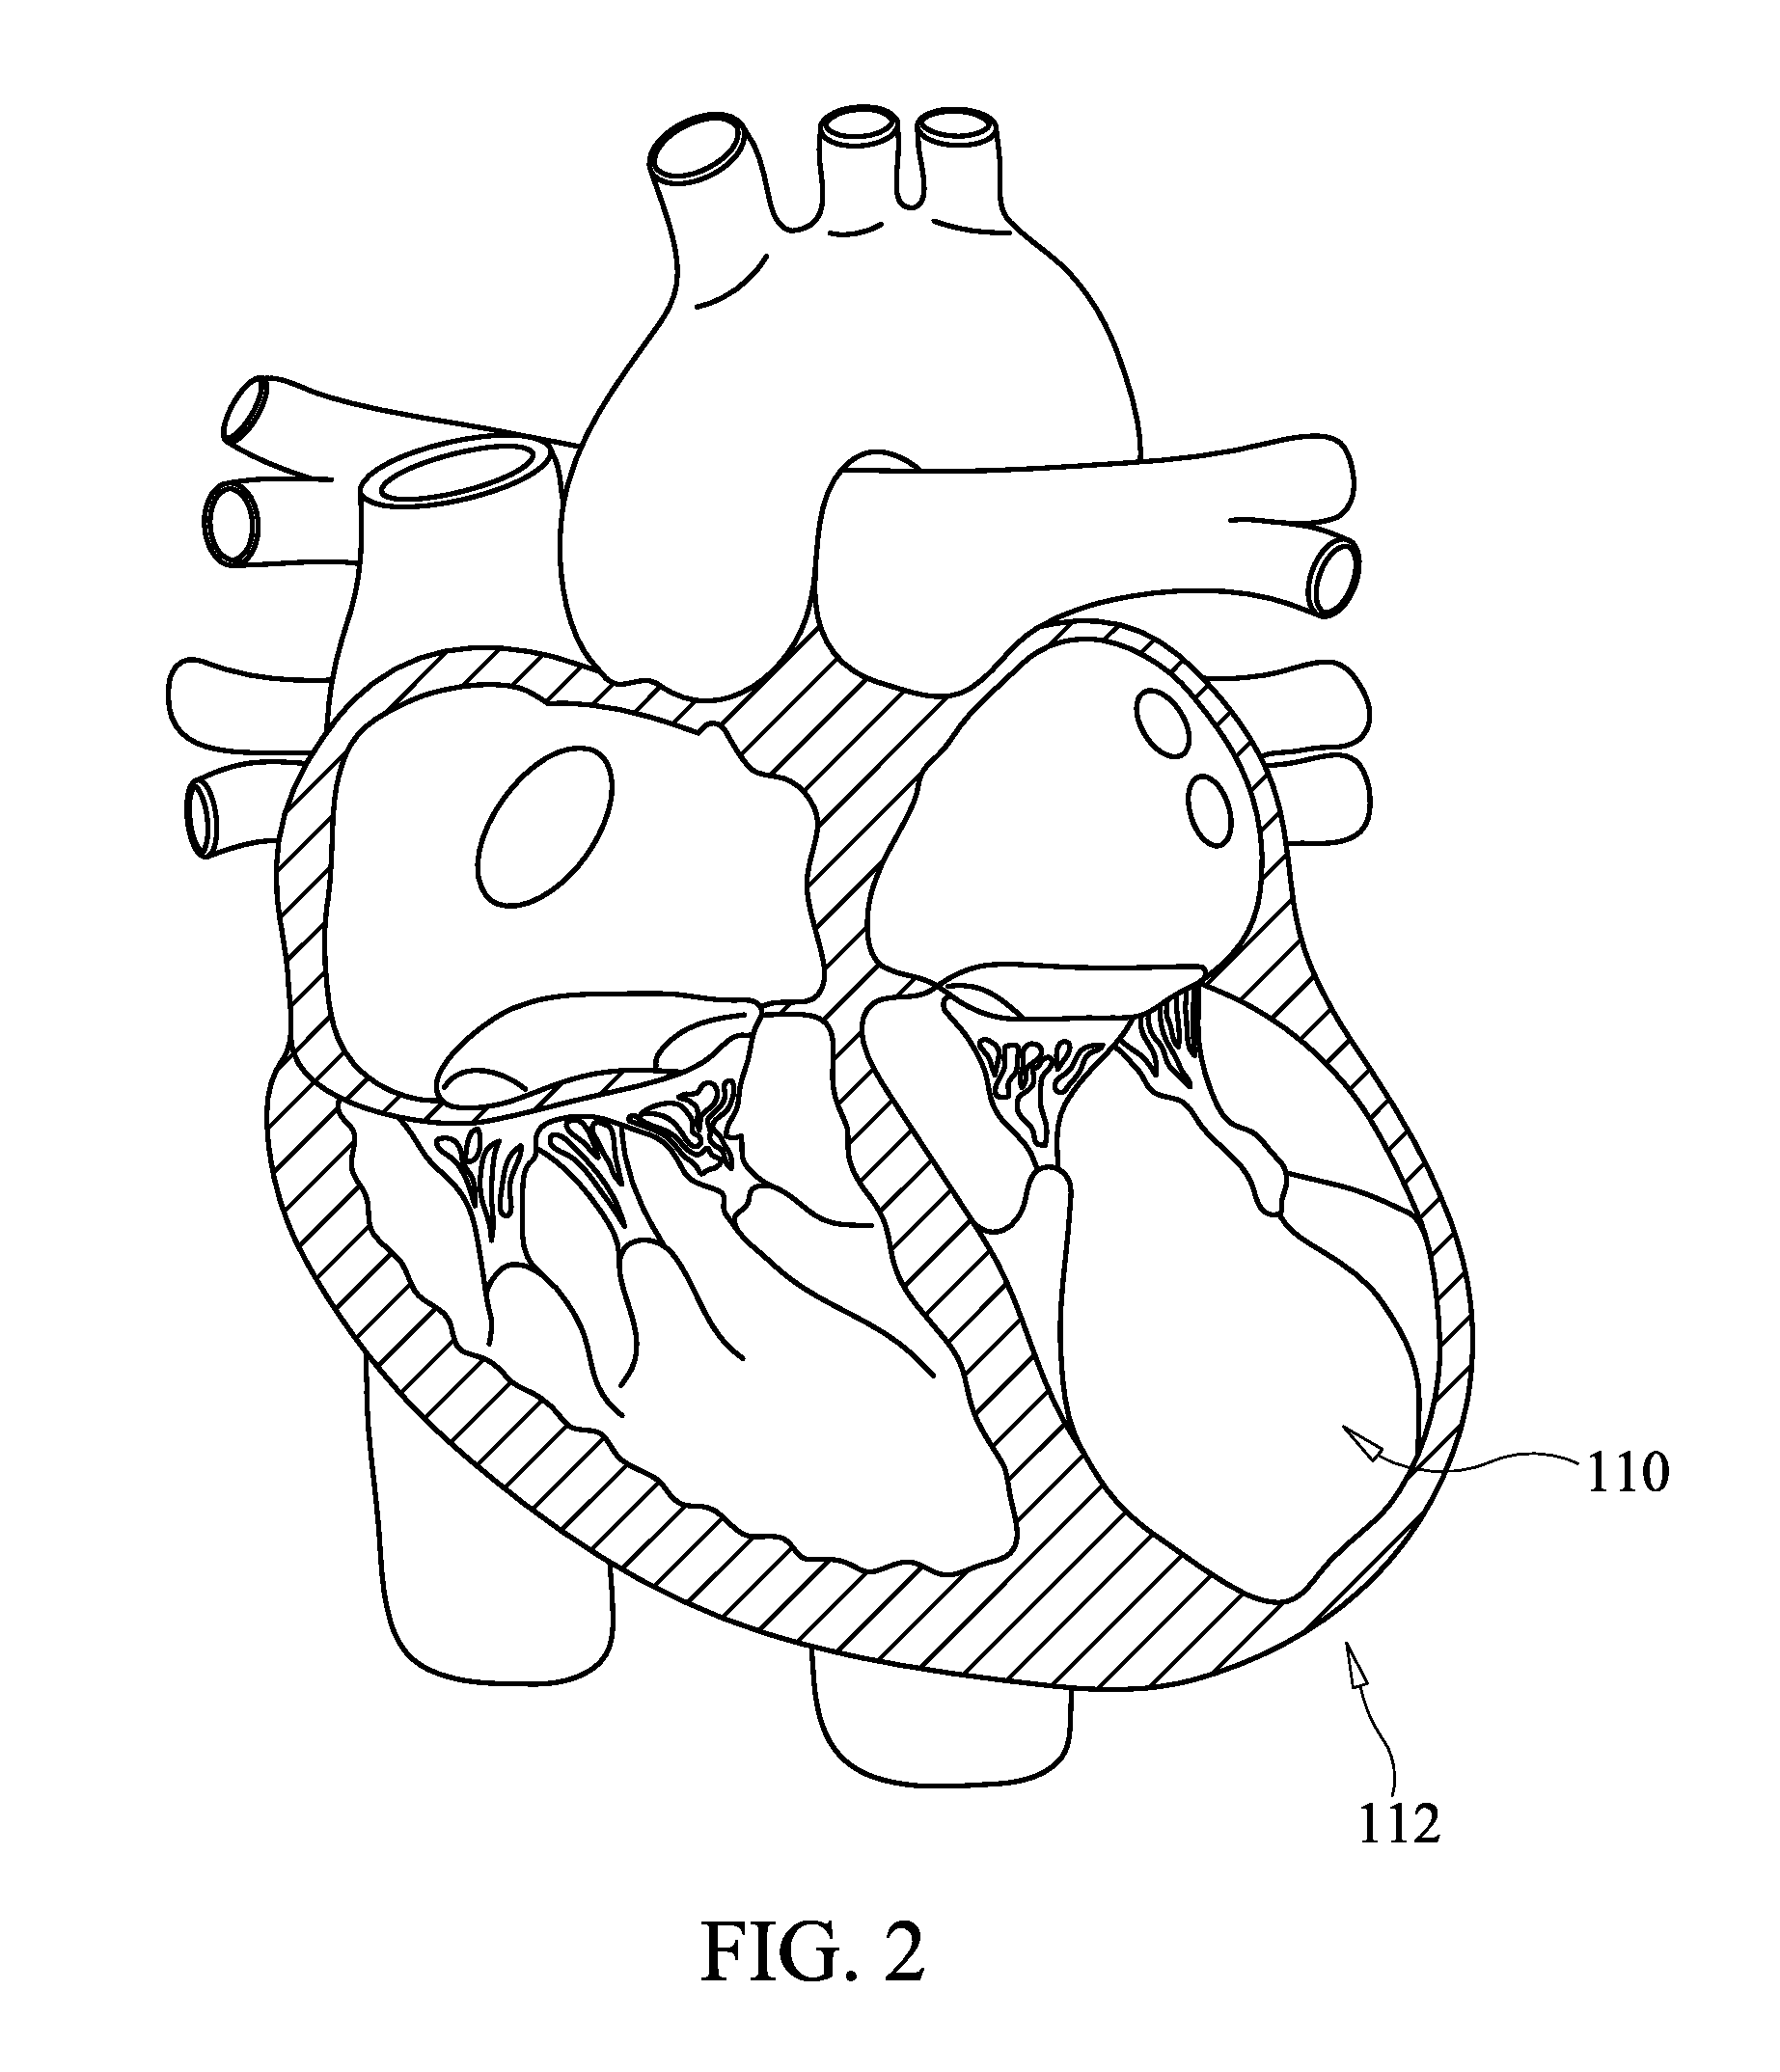 Method for percutaneous lateral access to the left ventricle for treatment of mitral insufficiency by papillary muscle alignment